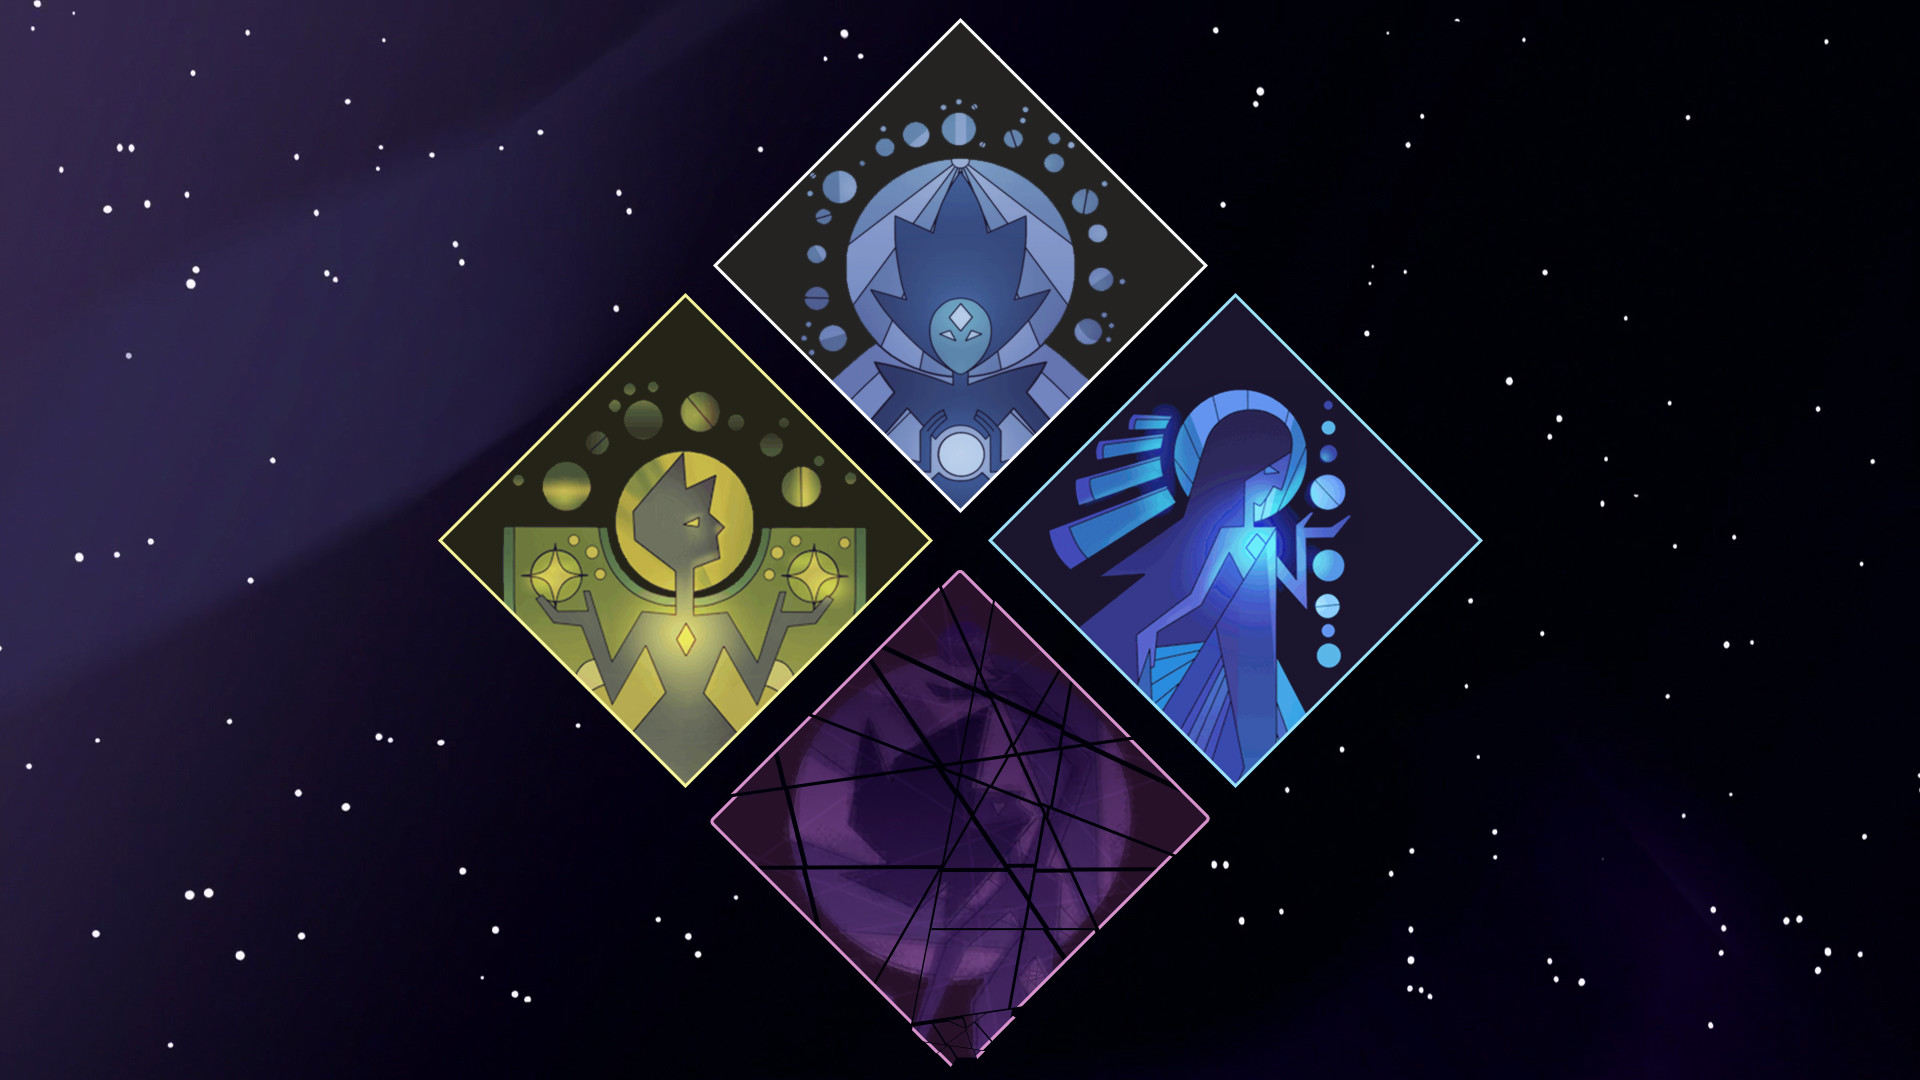 I made a background using The Diamond Authority's murals within their  symbol.